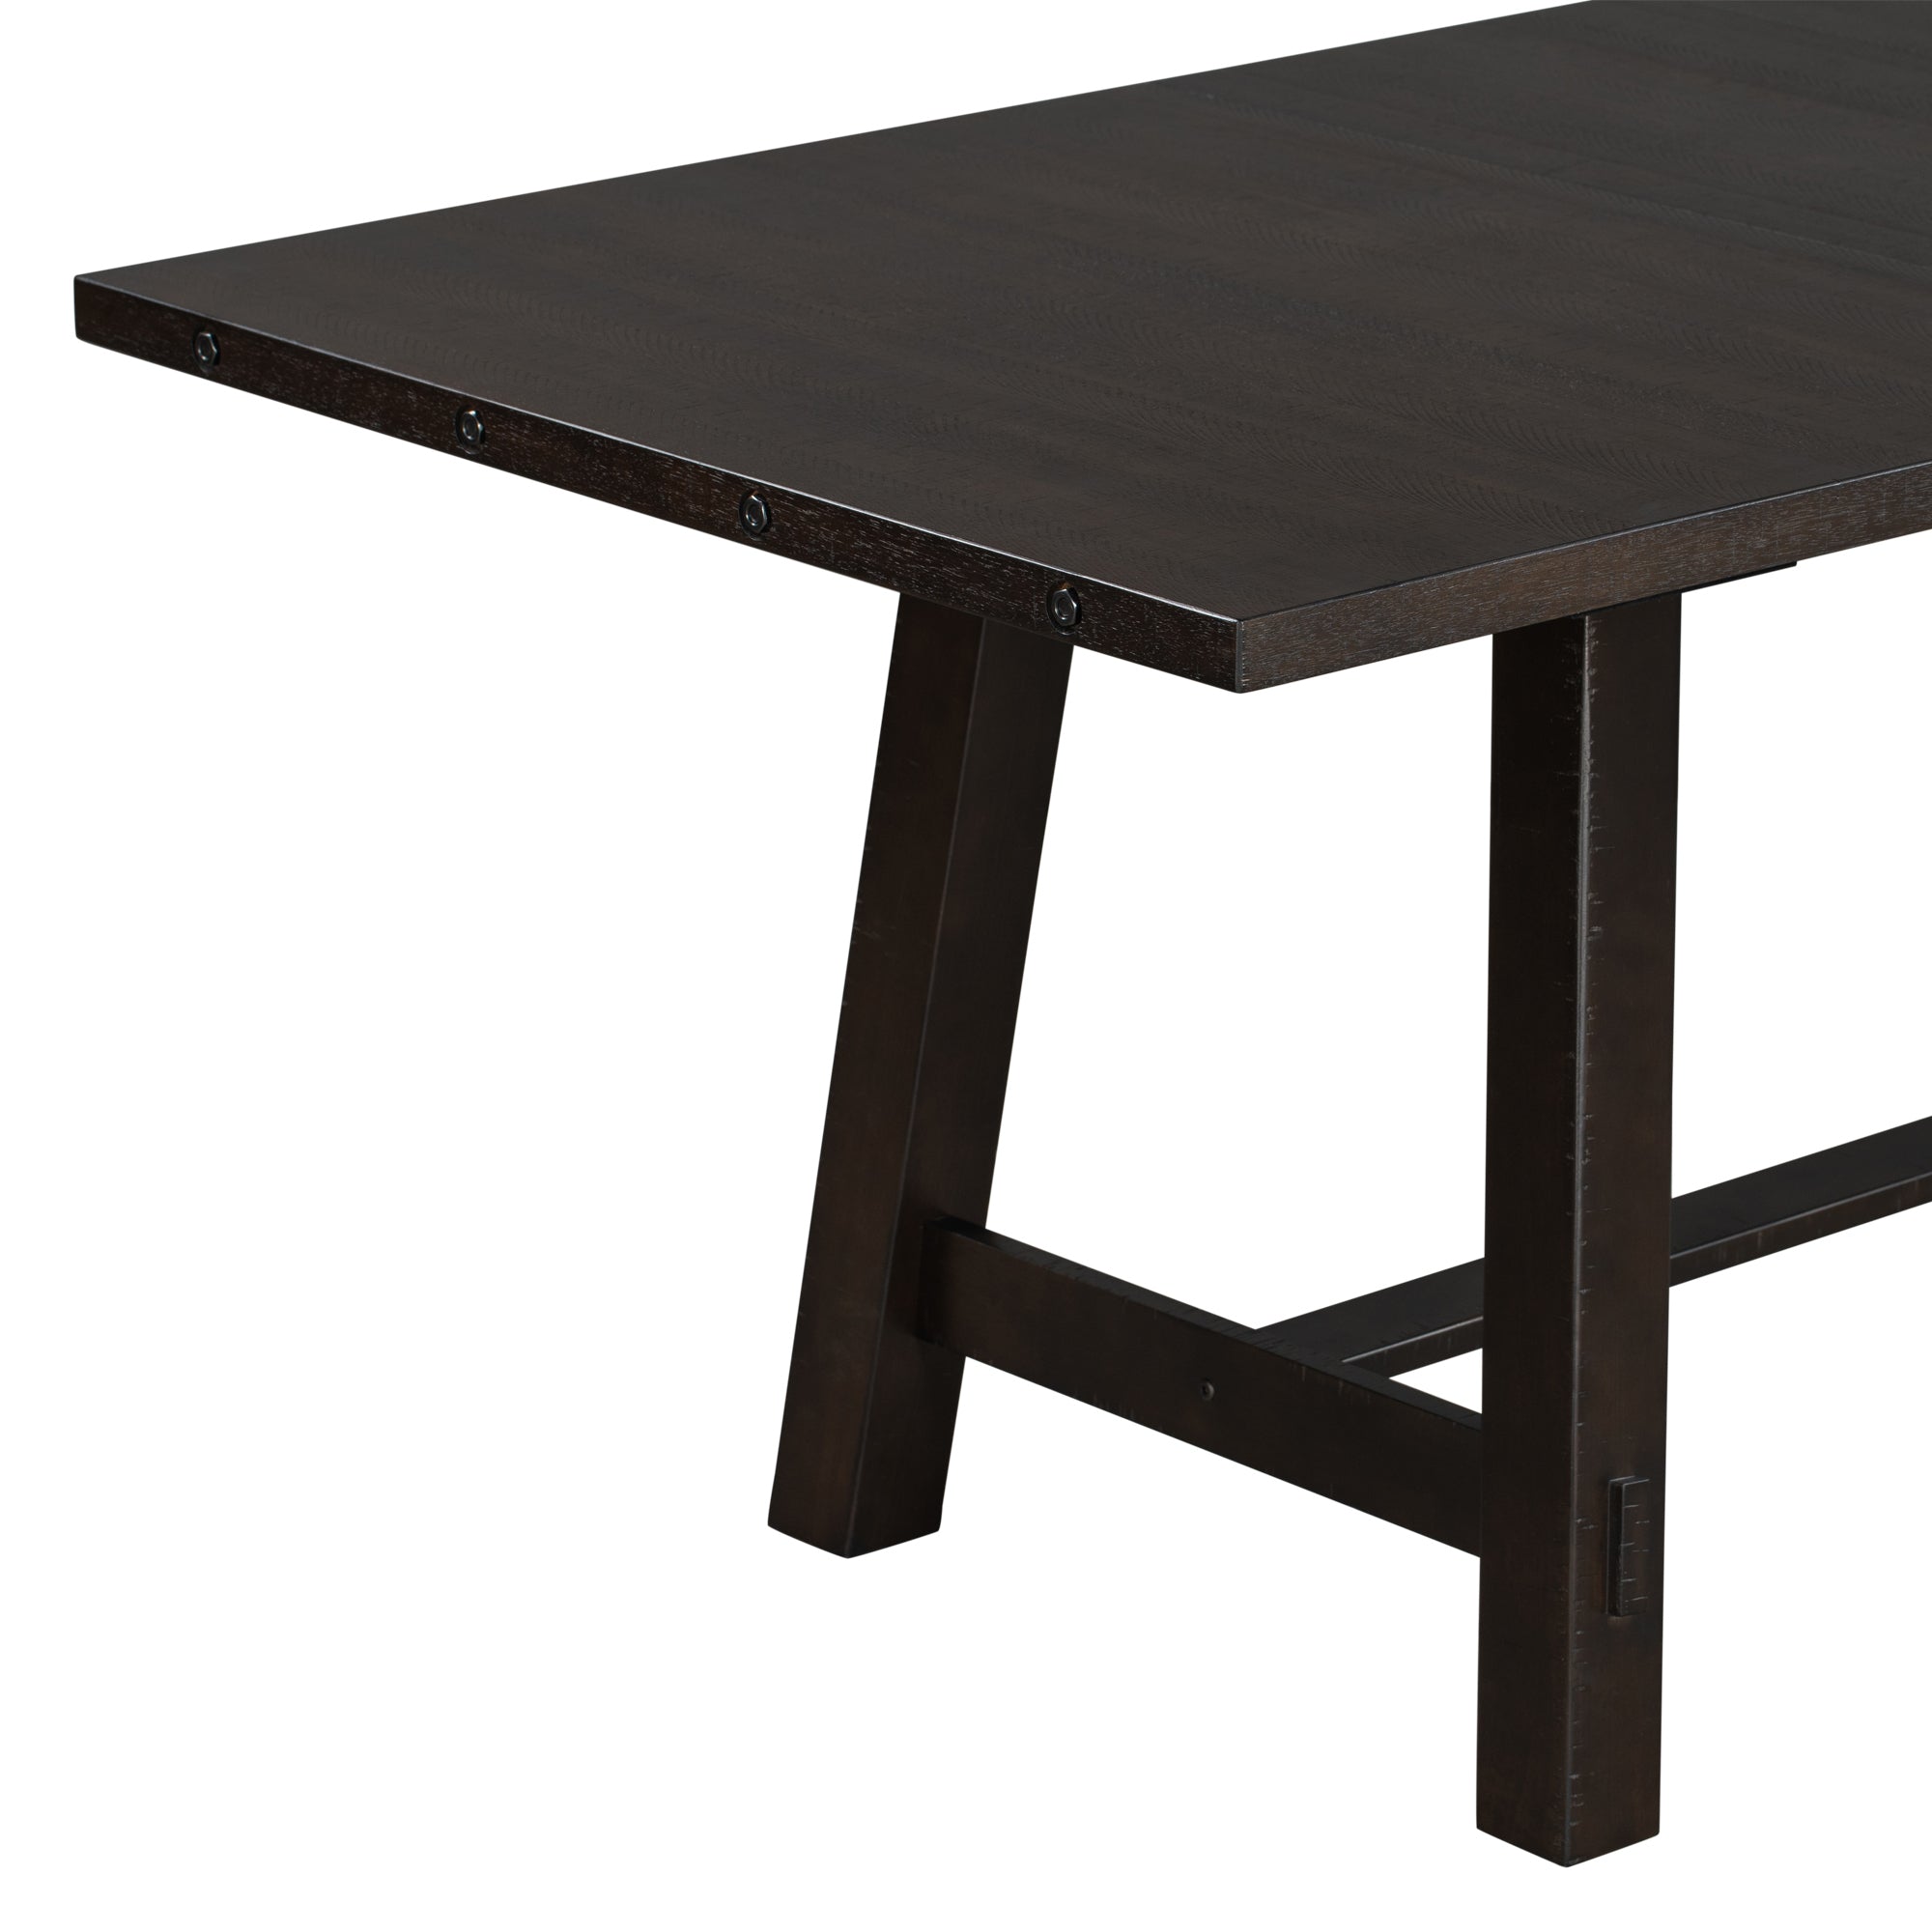 Retro Style Rectangular Dining Table Wood Extendable with 18" Leaf, Seats up to 8 - Espresso